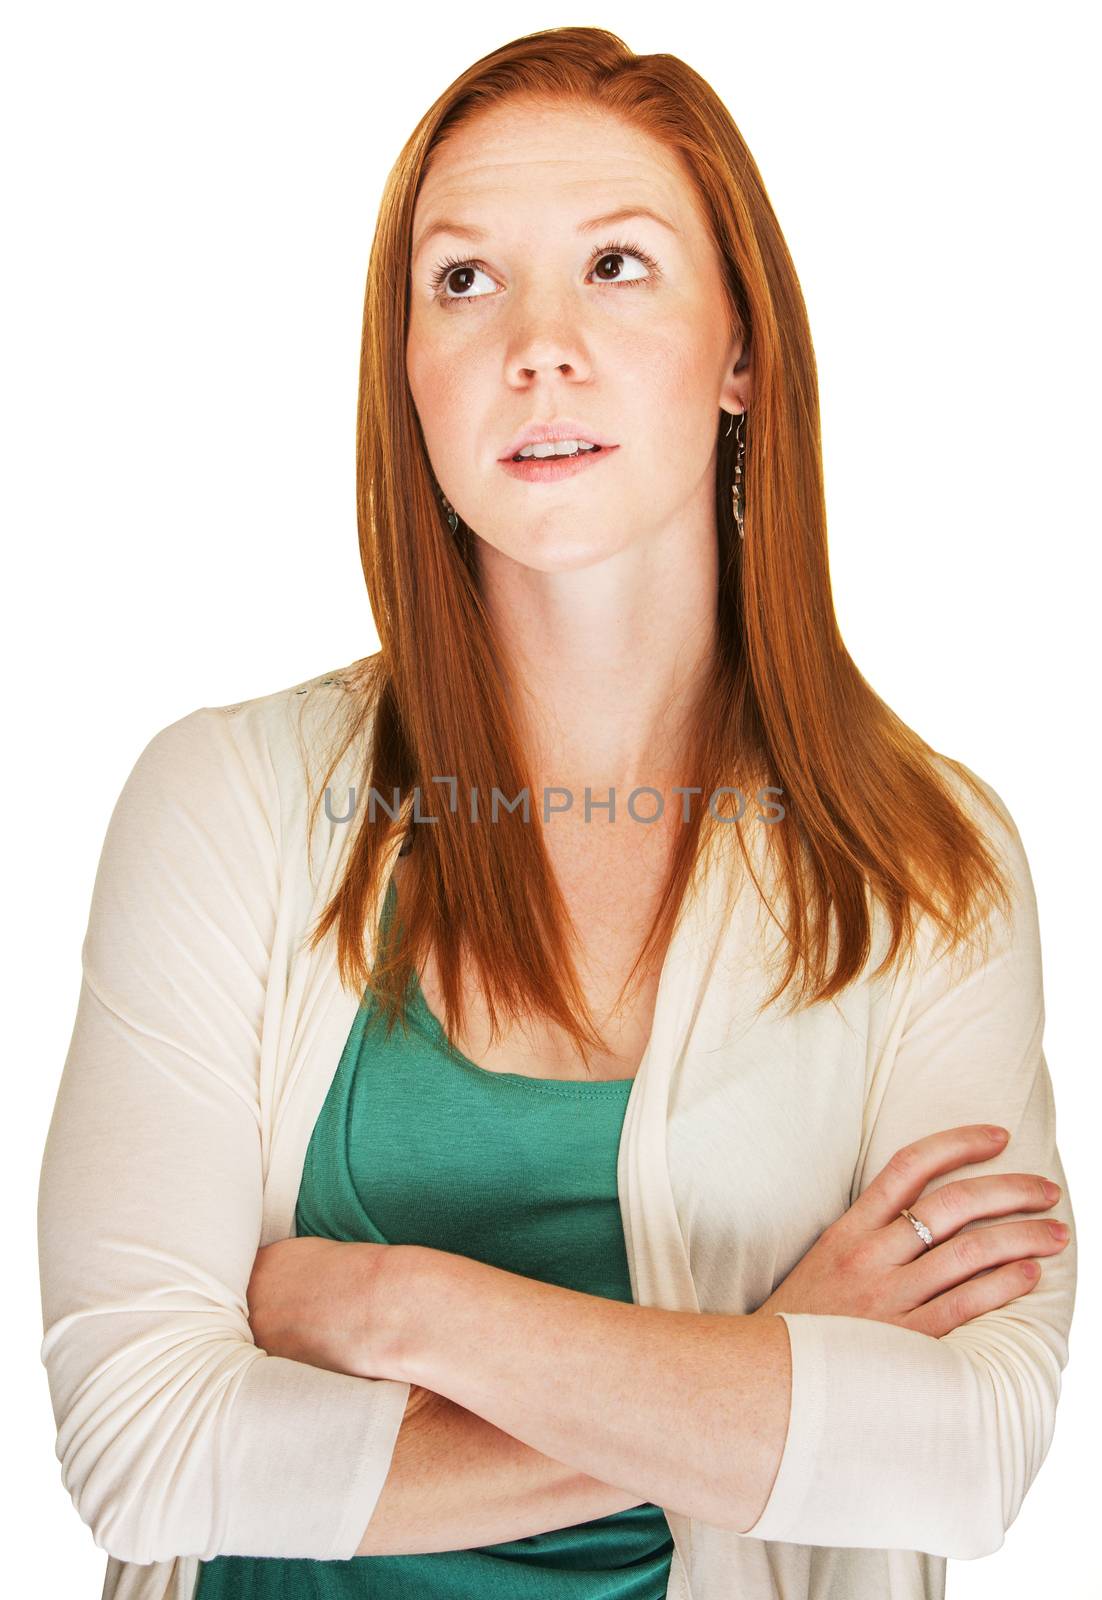 Snobbish red haired young woman with arms folded